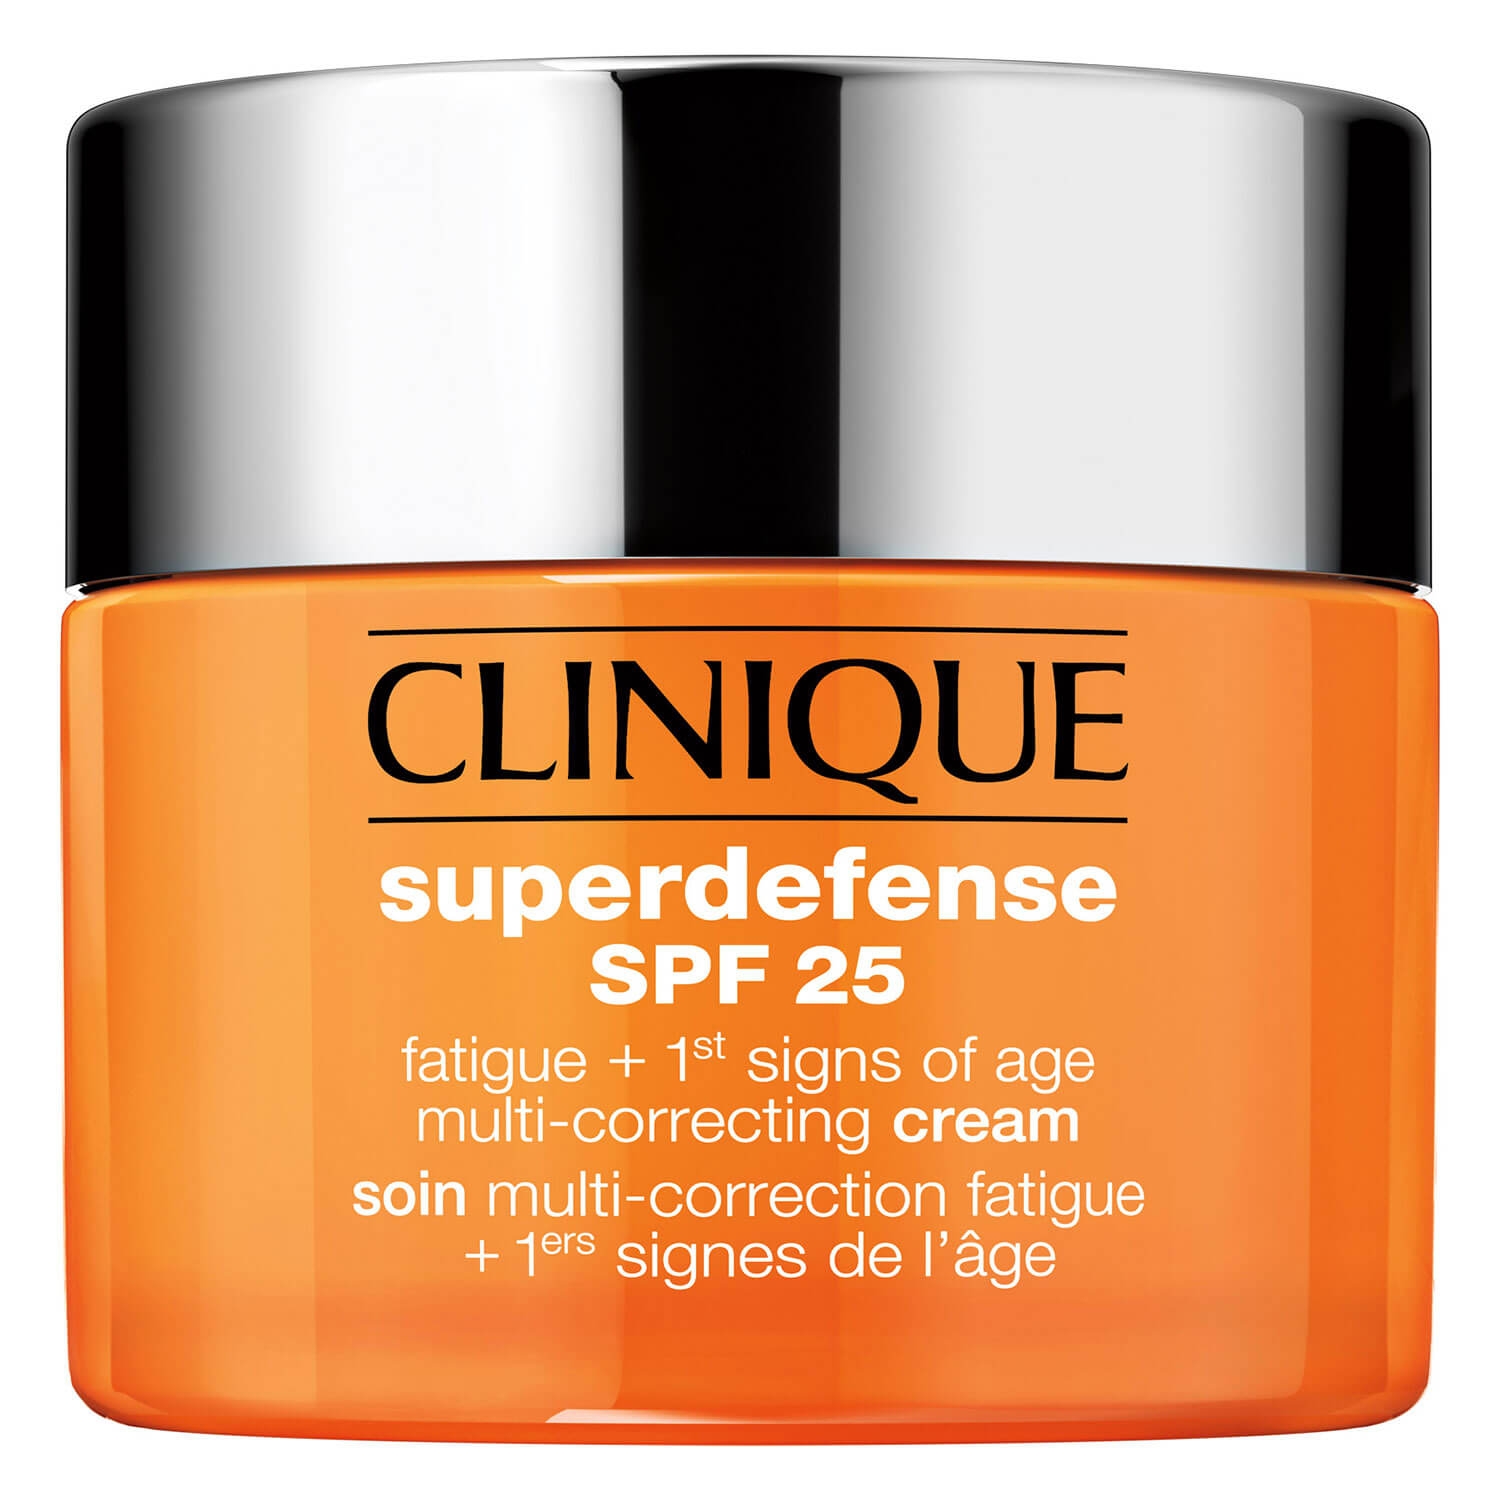 Product image from Superdefense - SPF 25 Fatigue + 1st Signs of Age Multi-Correcting Cream 3/4